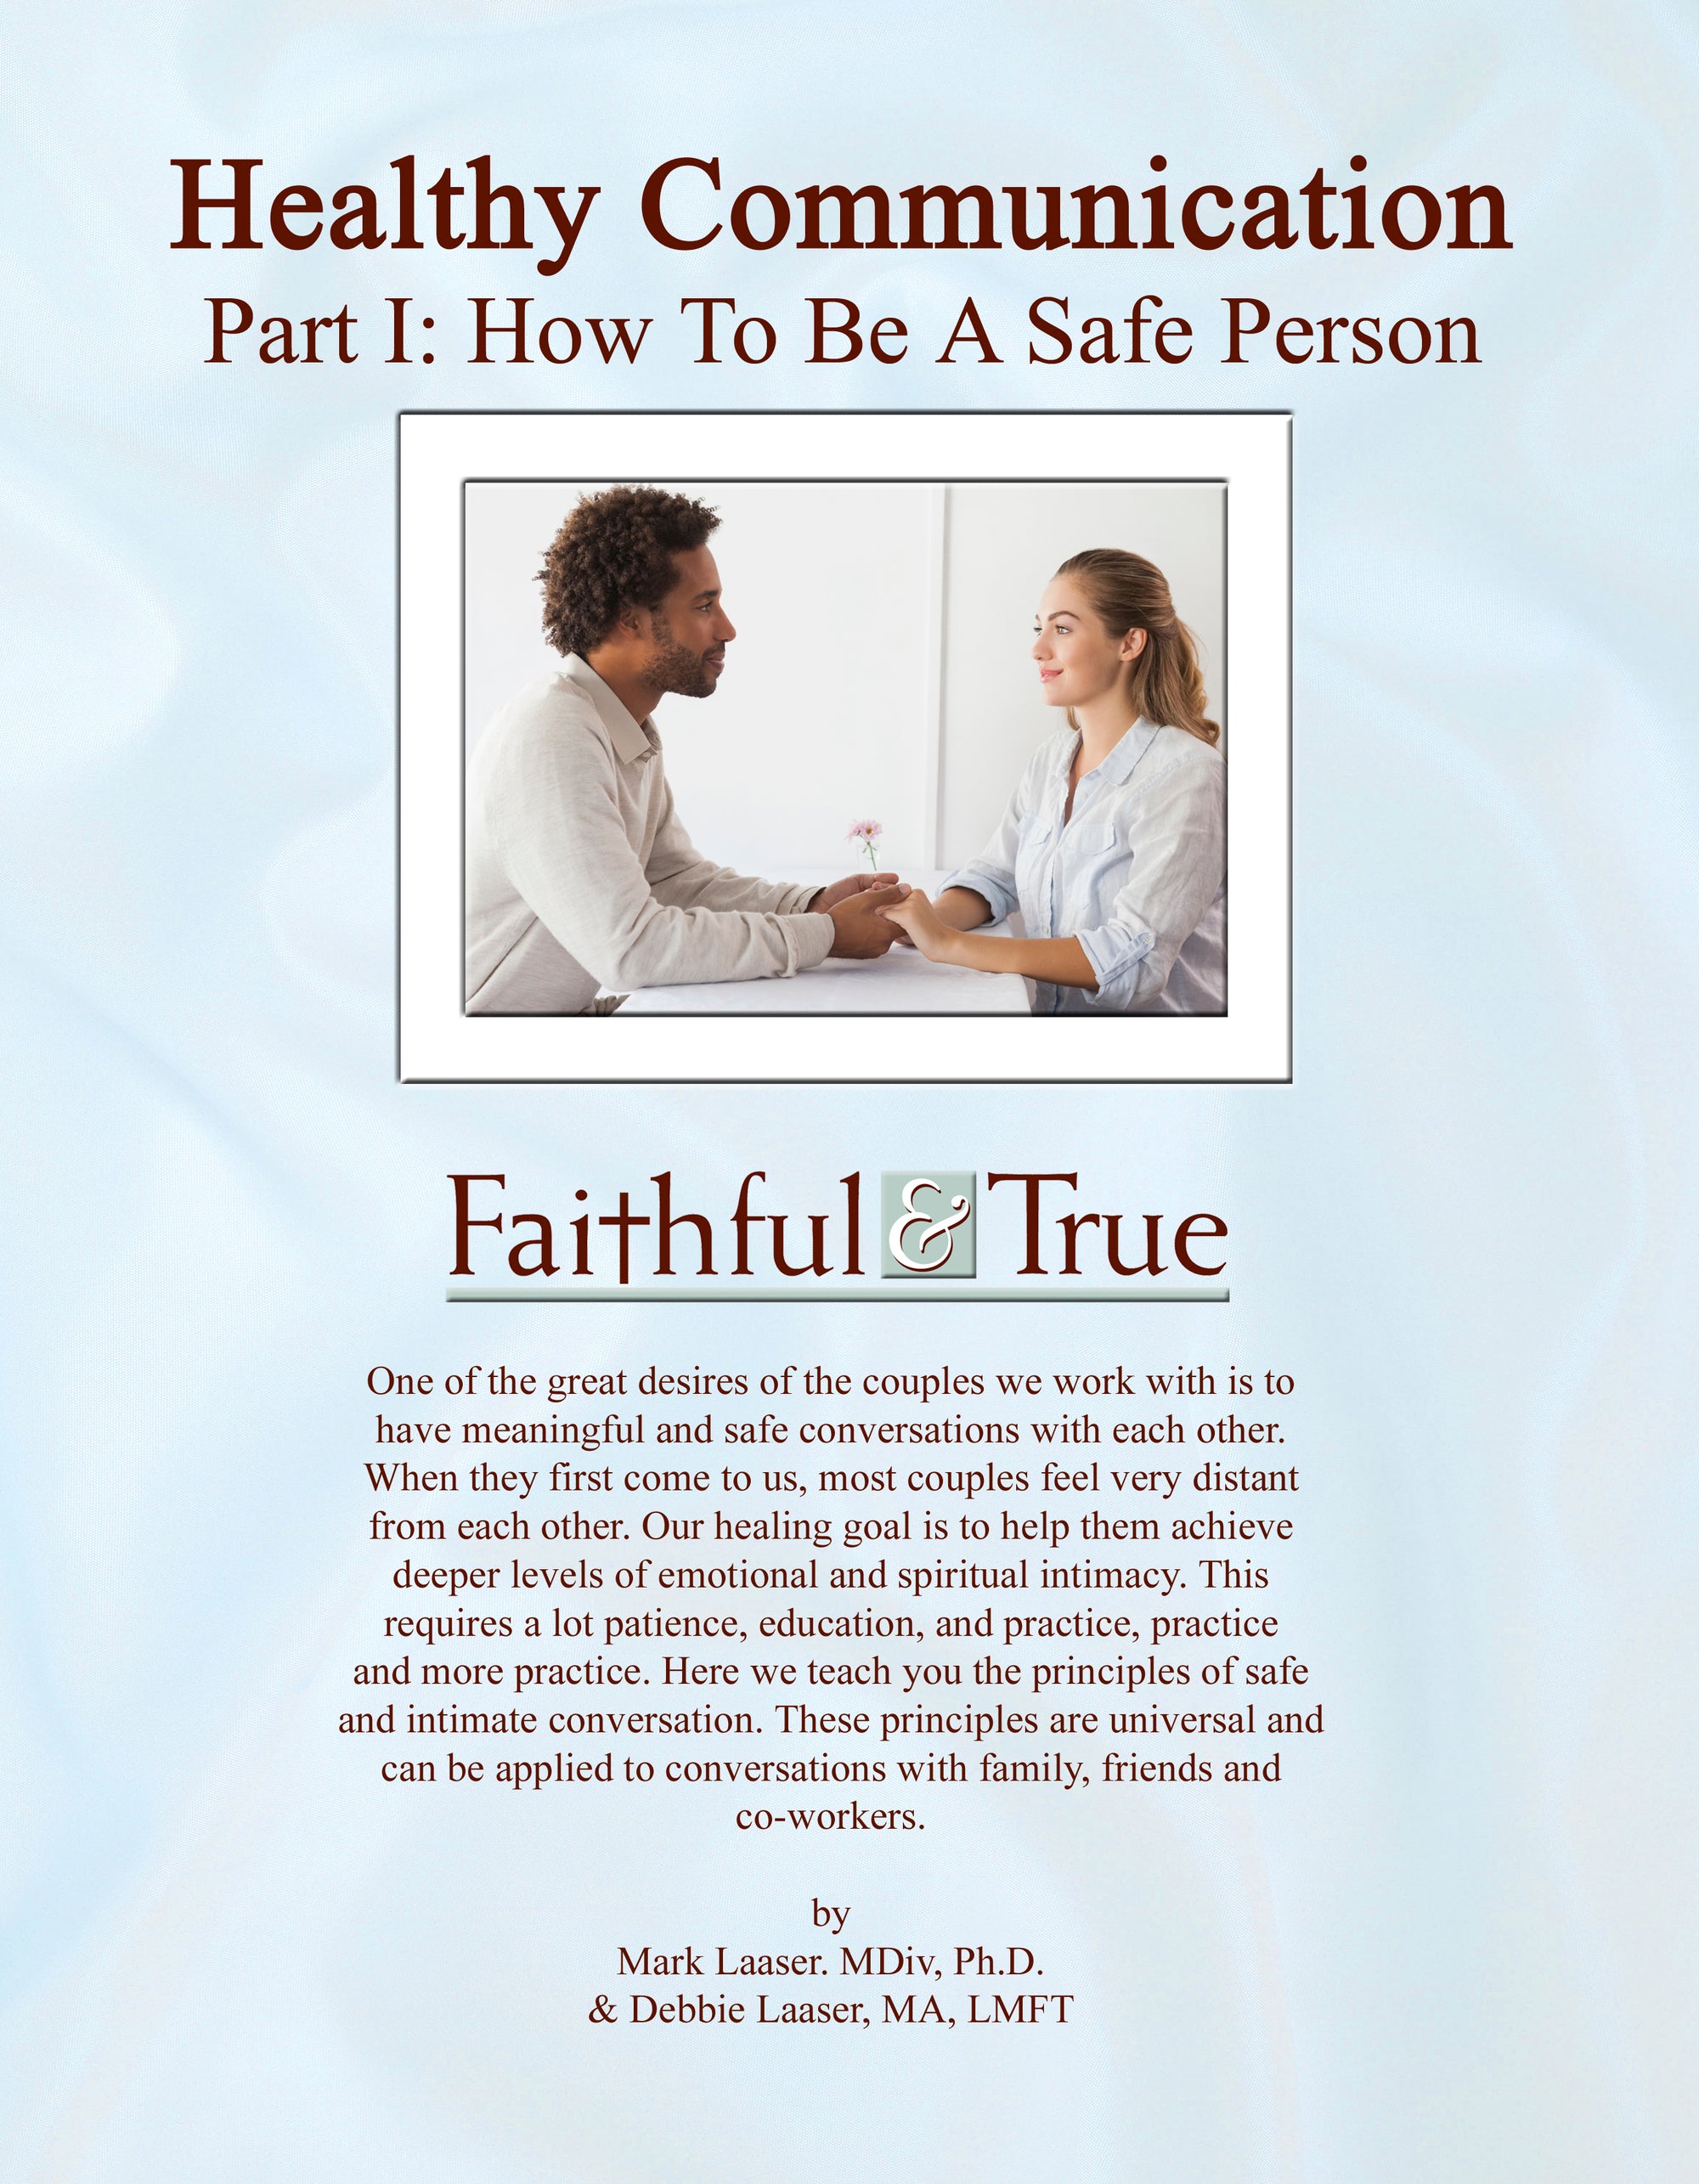 Healthy Communication Part I: How to be a Safe Person PDF